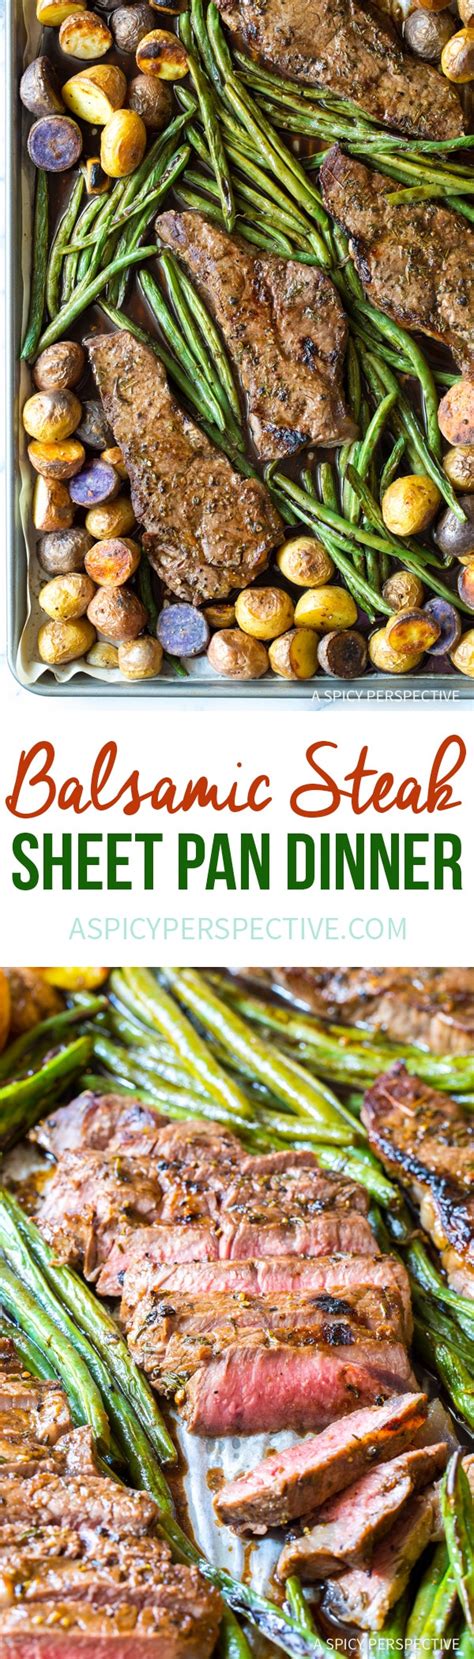 Fresh rosemary goes hand in hand with steak, and the cut veggies are. Balsamic Steak Sheet Pan Dinner - A Spicy Perspective